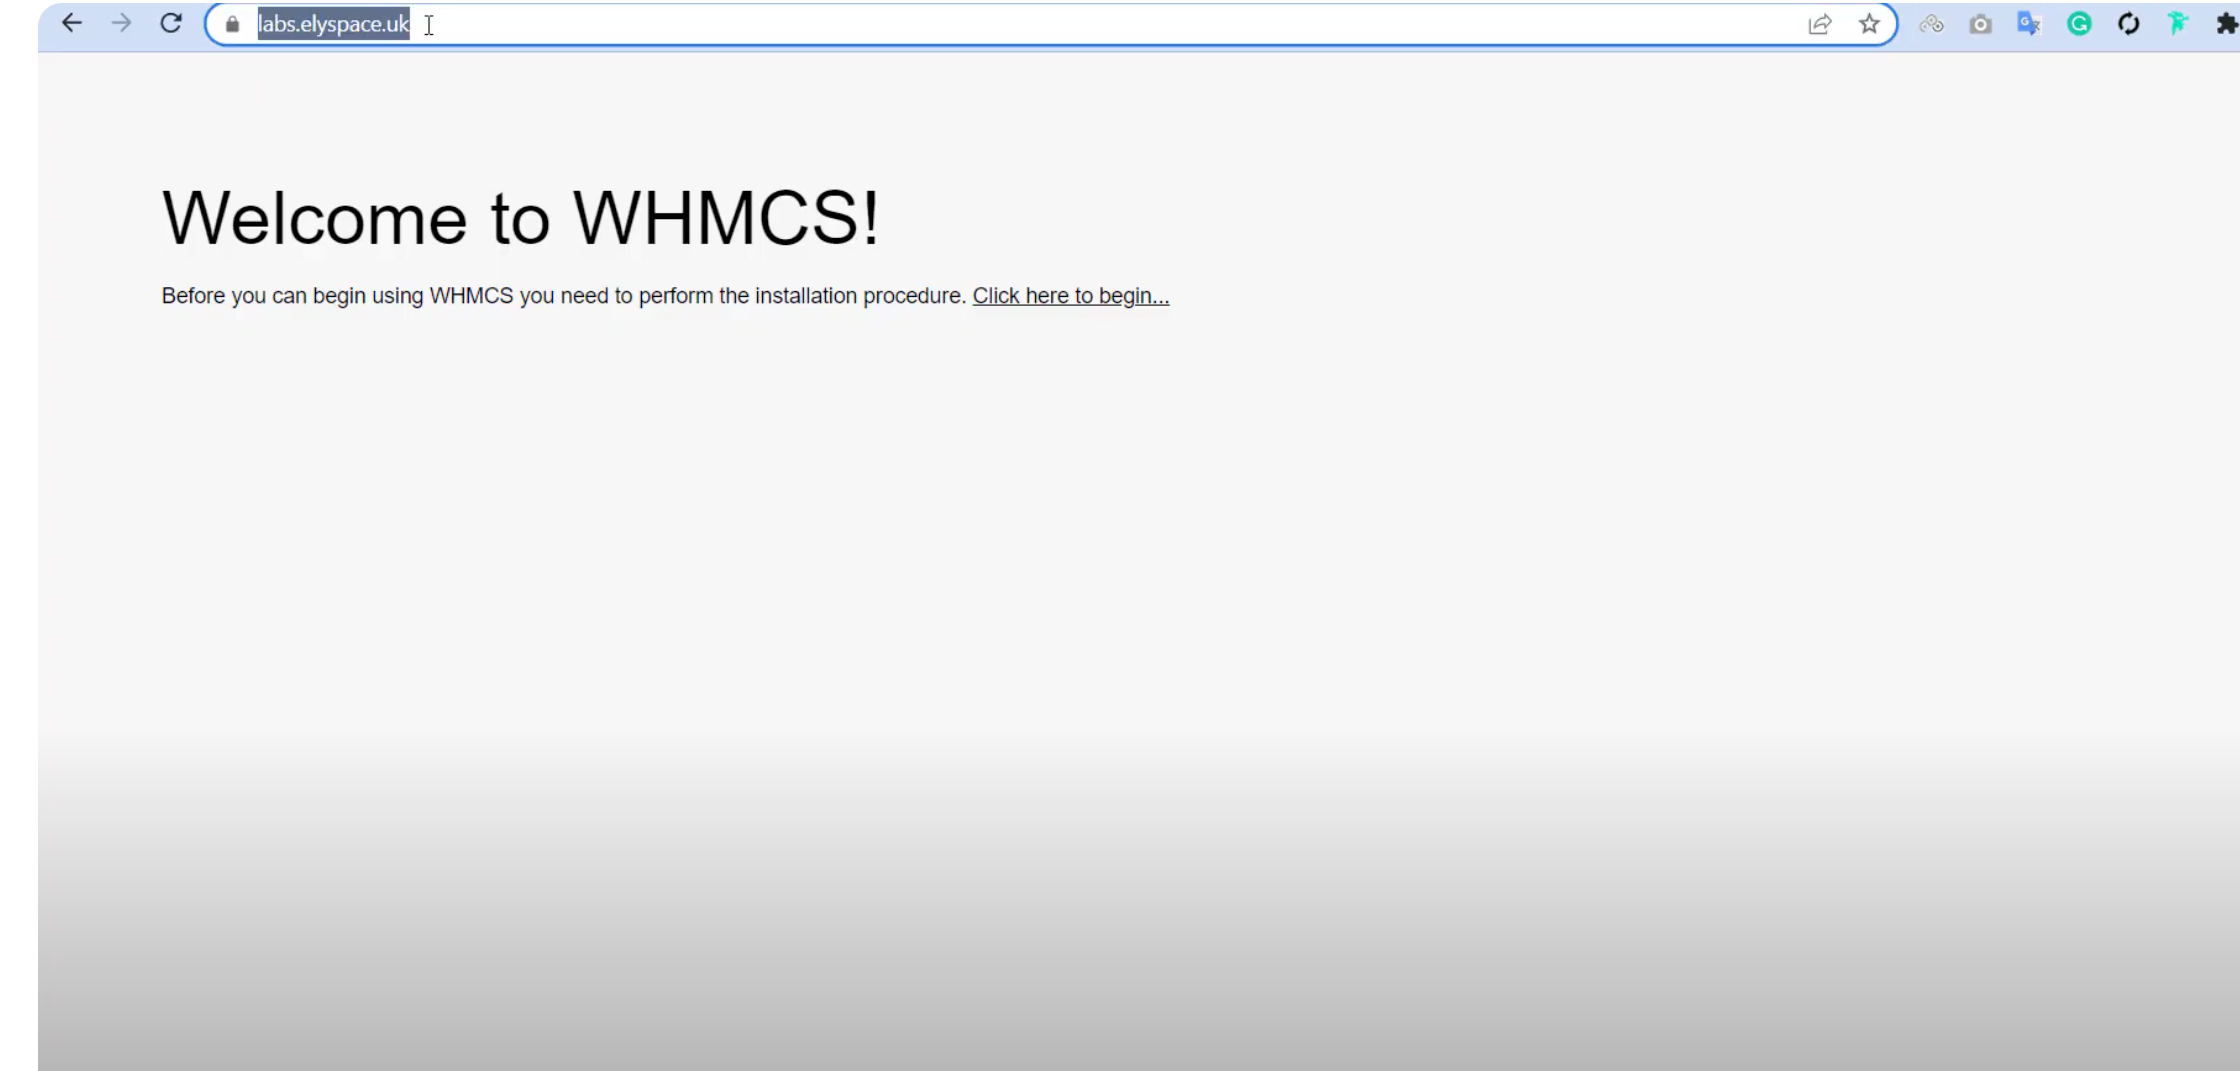 WHMCS Installation and Setup starting